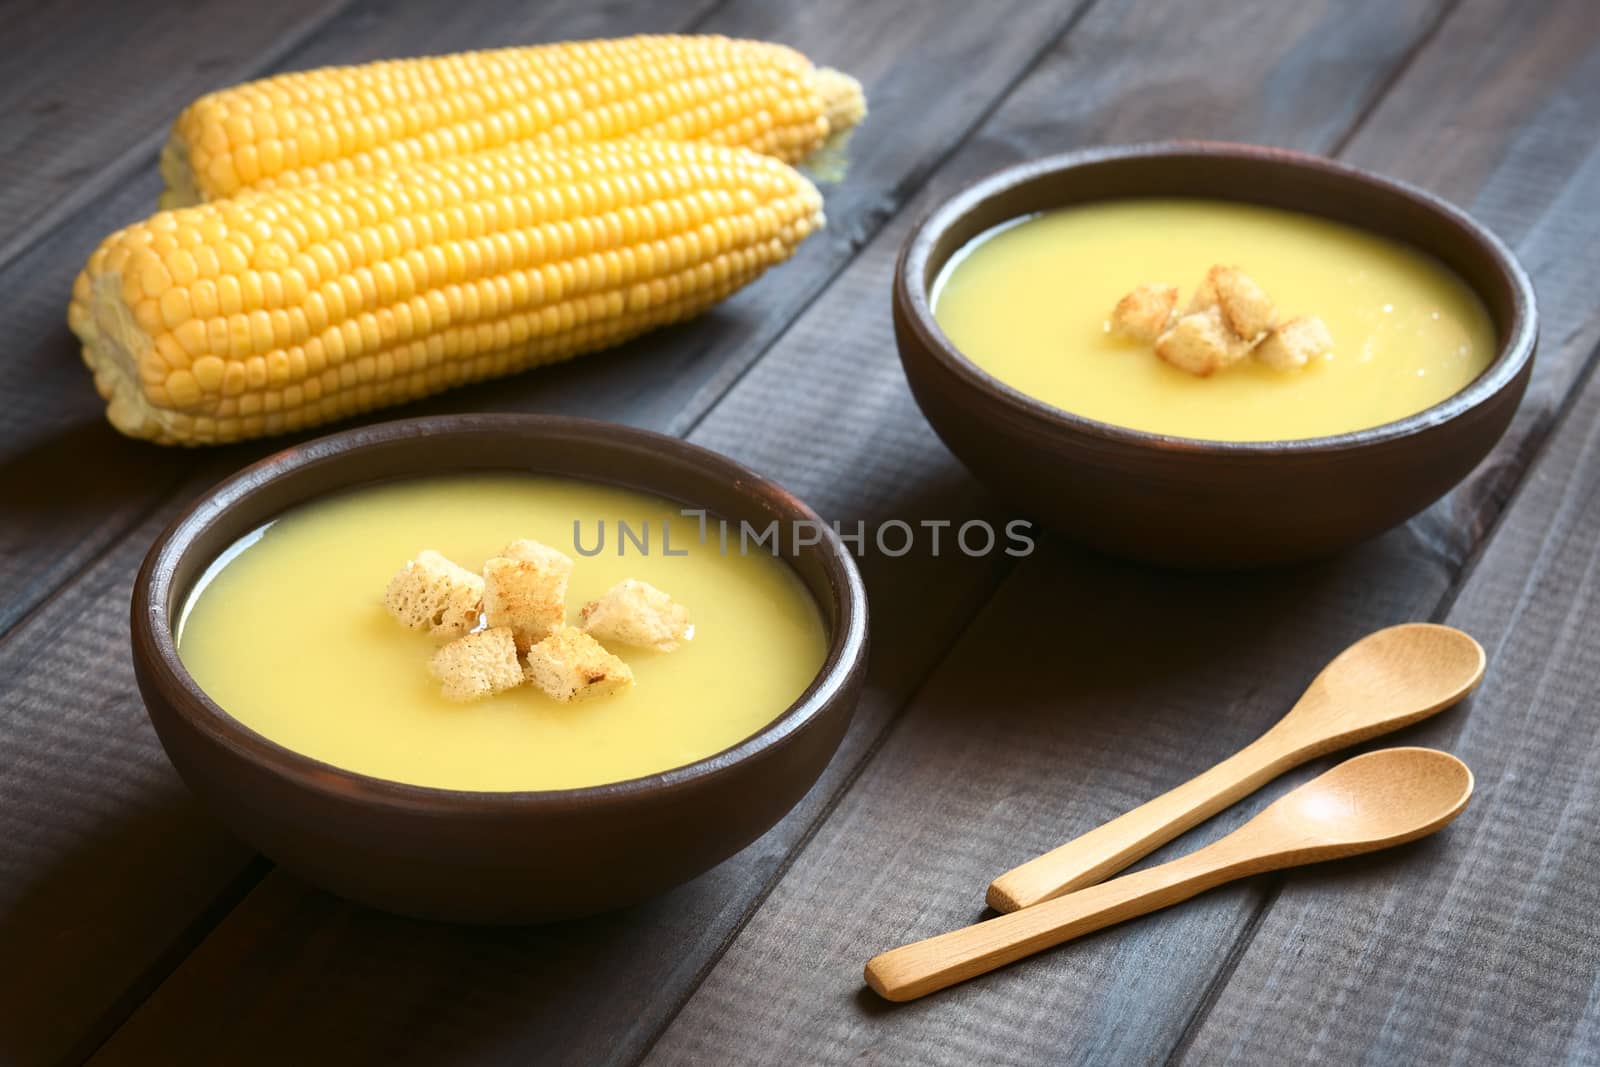 Two bowls of cream of corn soup with croutons on top, photographed on dark wood with natural light (Selective Focus, Focus on the front of the croutons on the first soup)